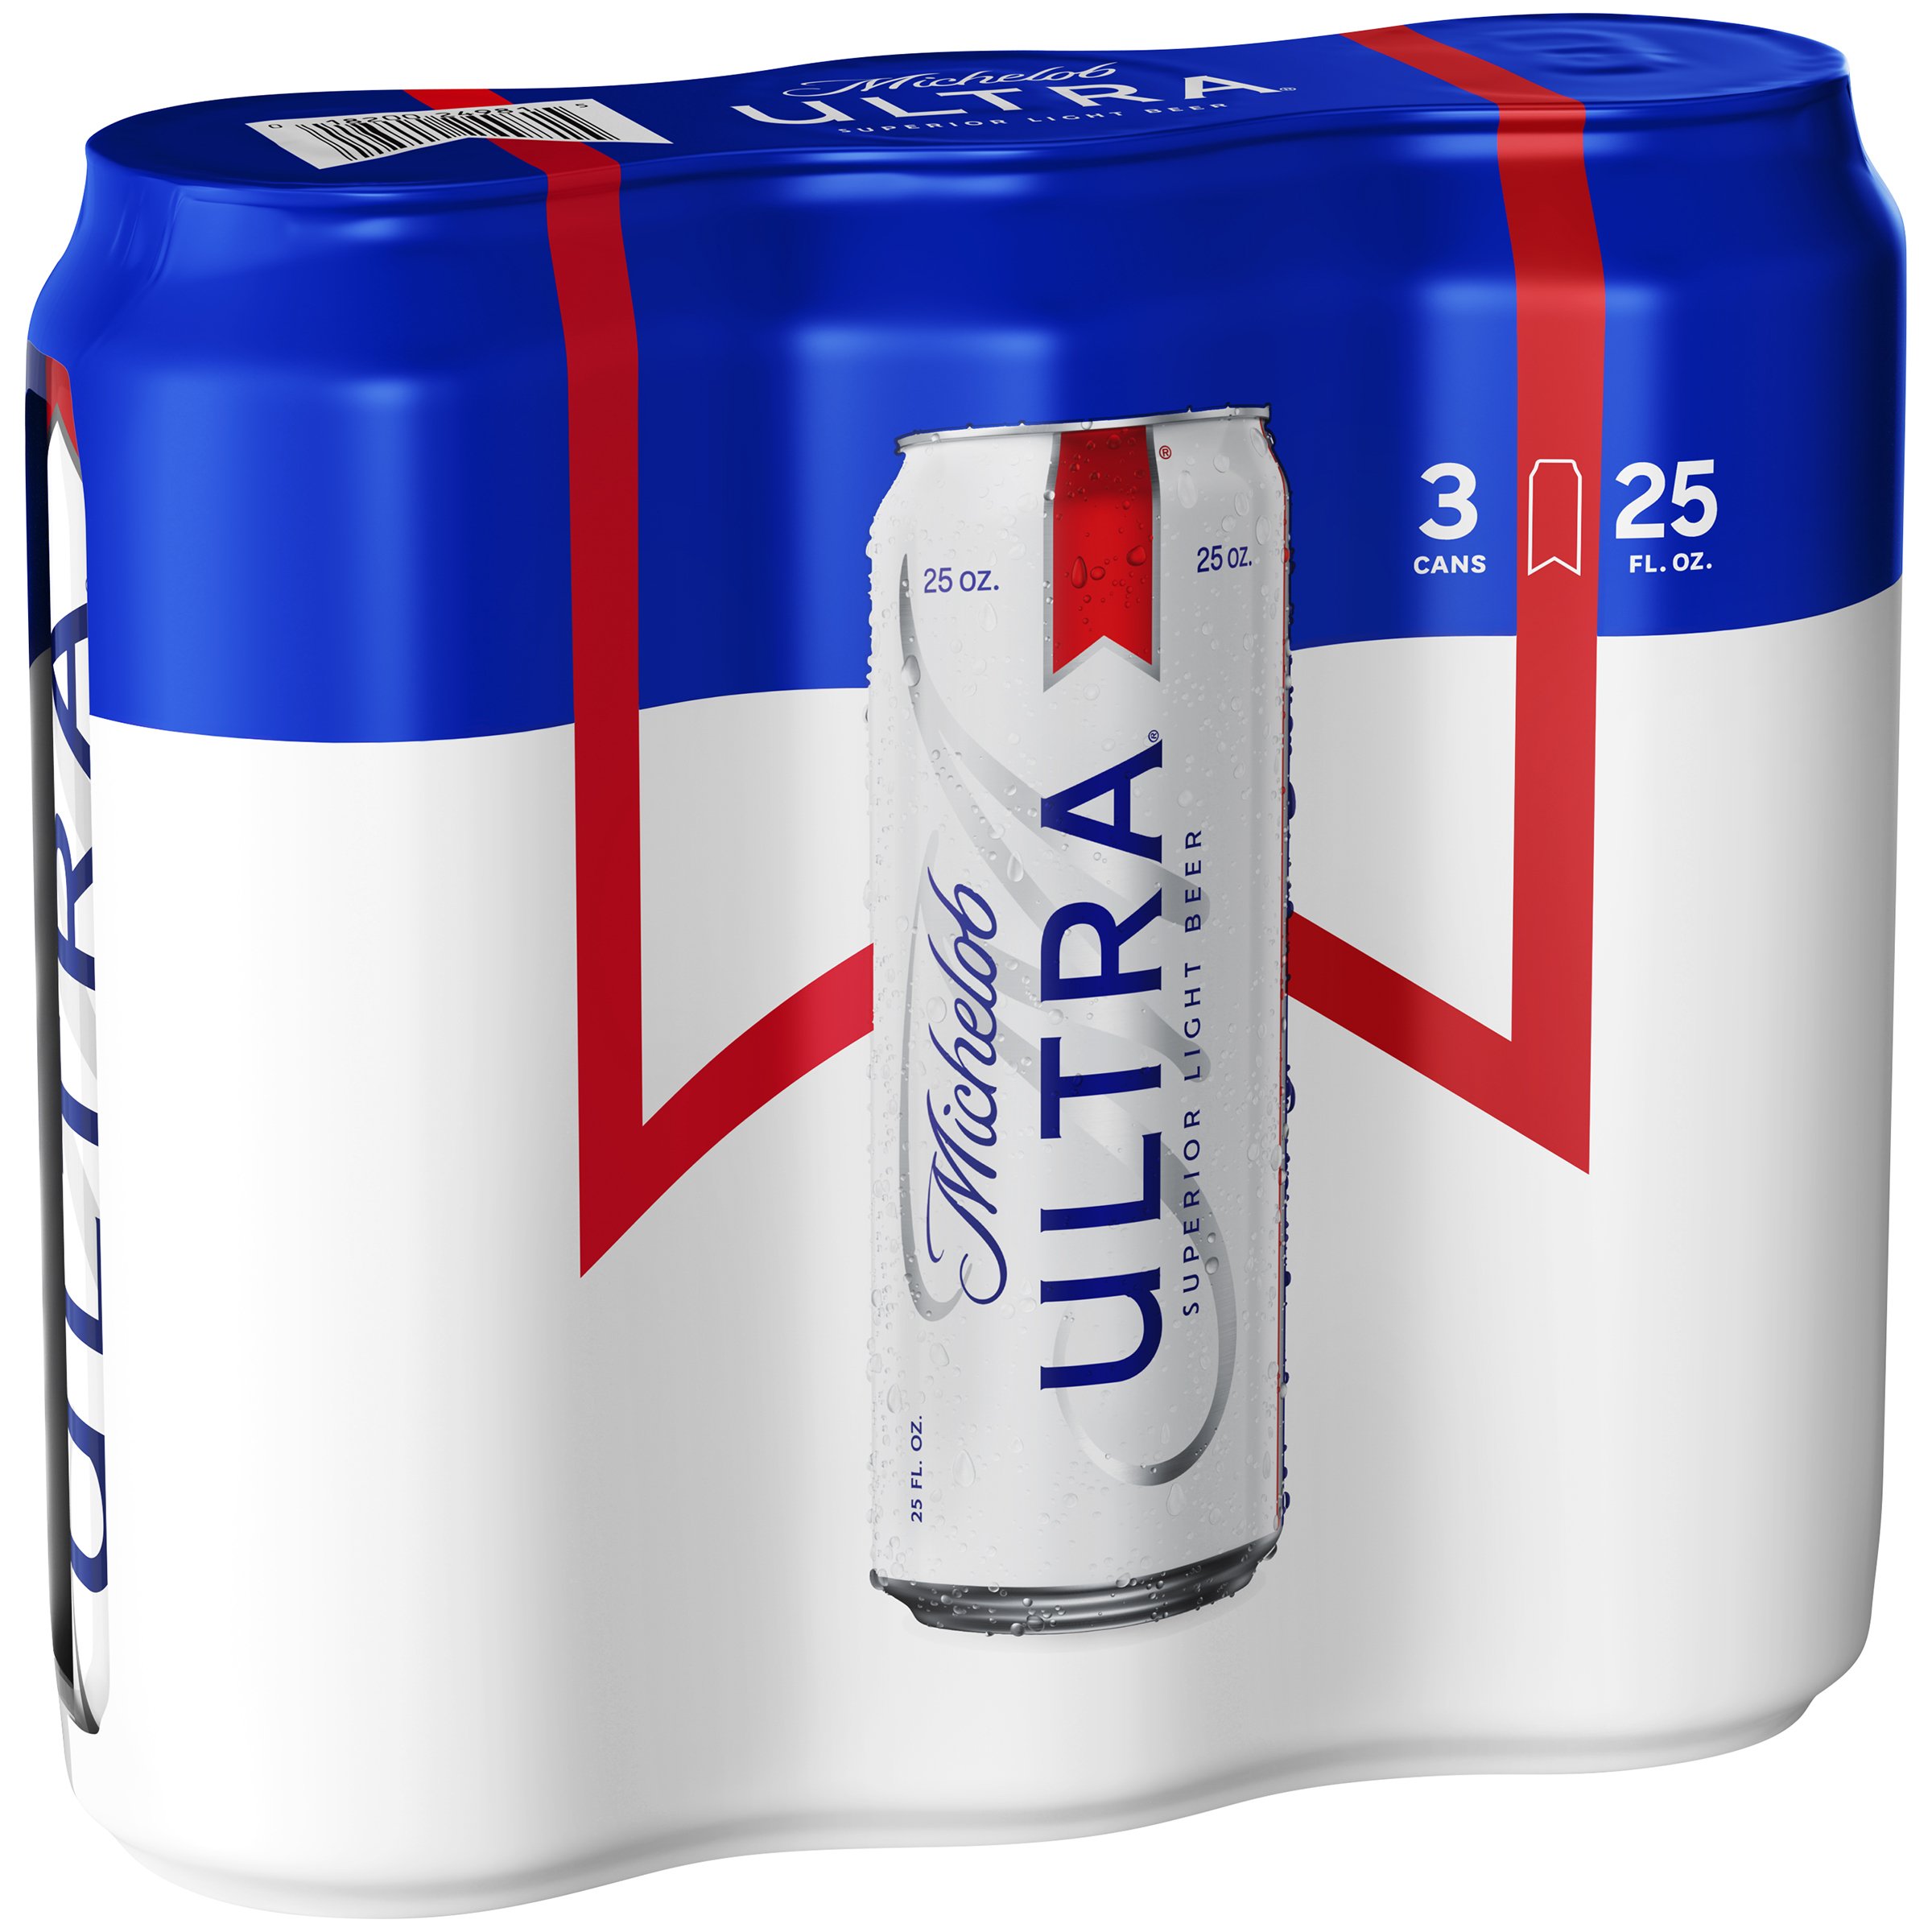 Michelob Ultra Light Beer 25 oz Cans - Shop Beer at H-E-B